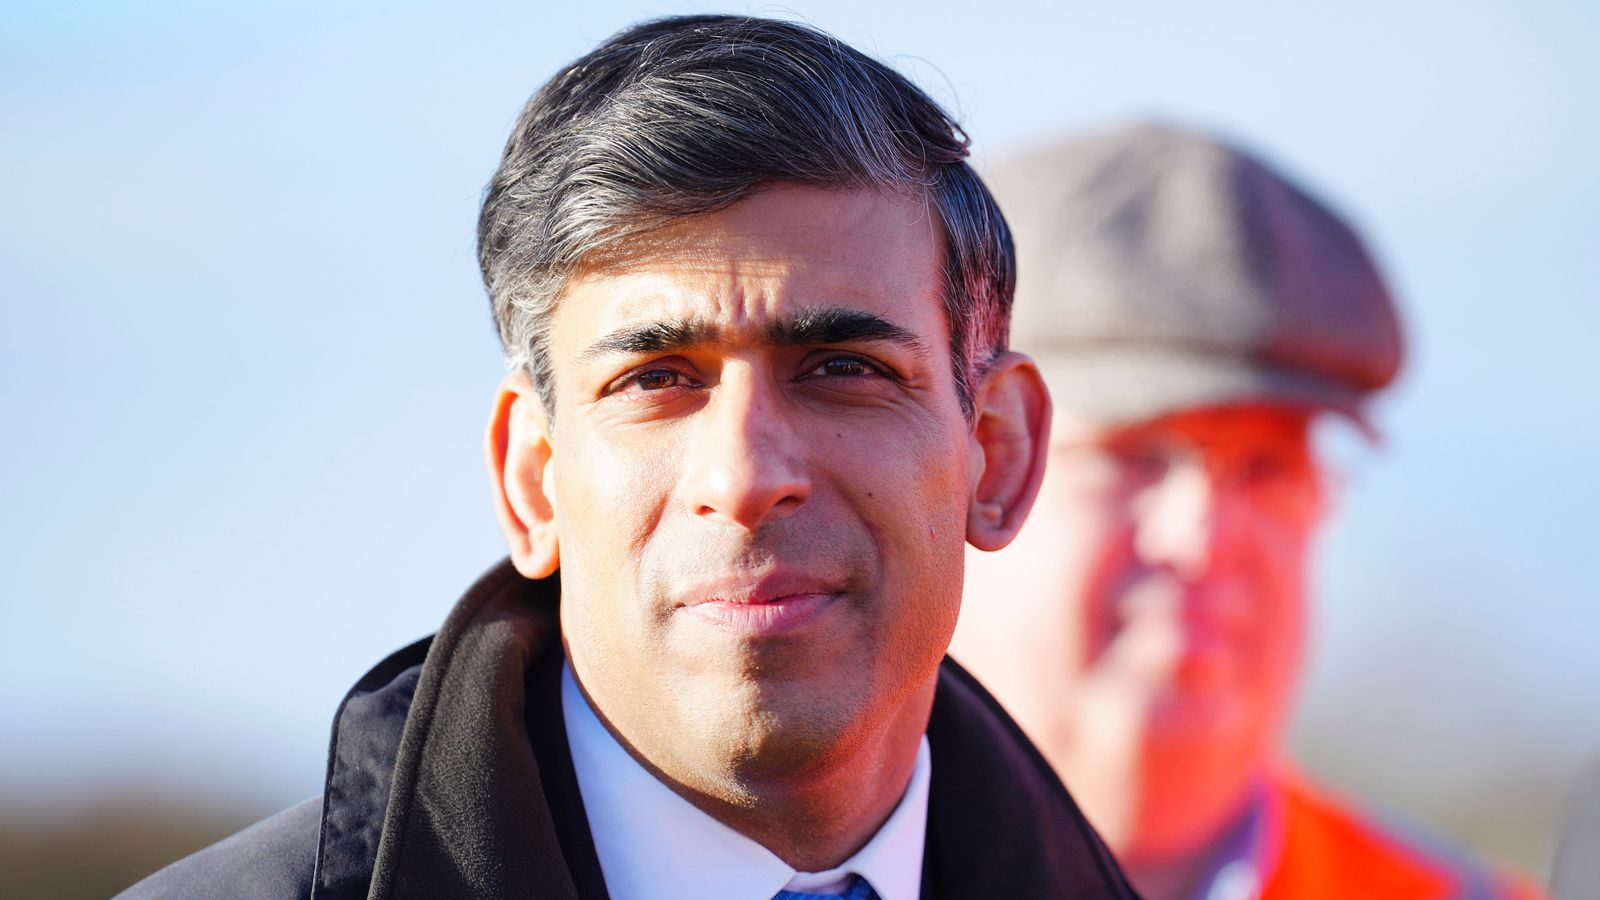 Rishi Sunak struggling to maintain voter coalition that delivered 2019 victory, according to Sky News voter panel